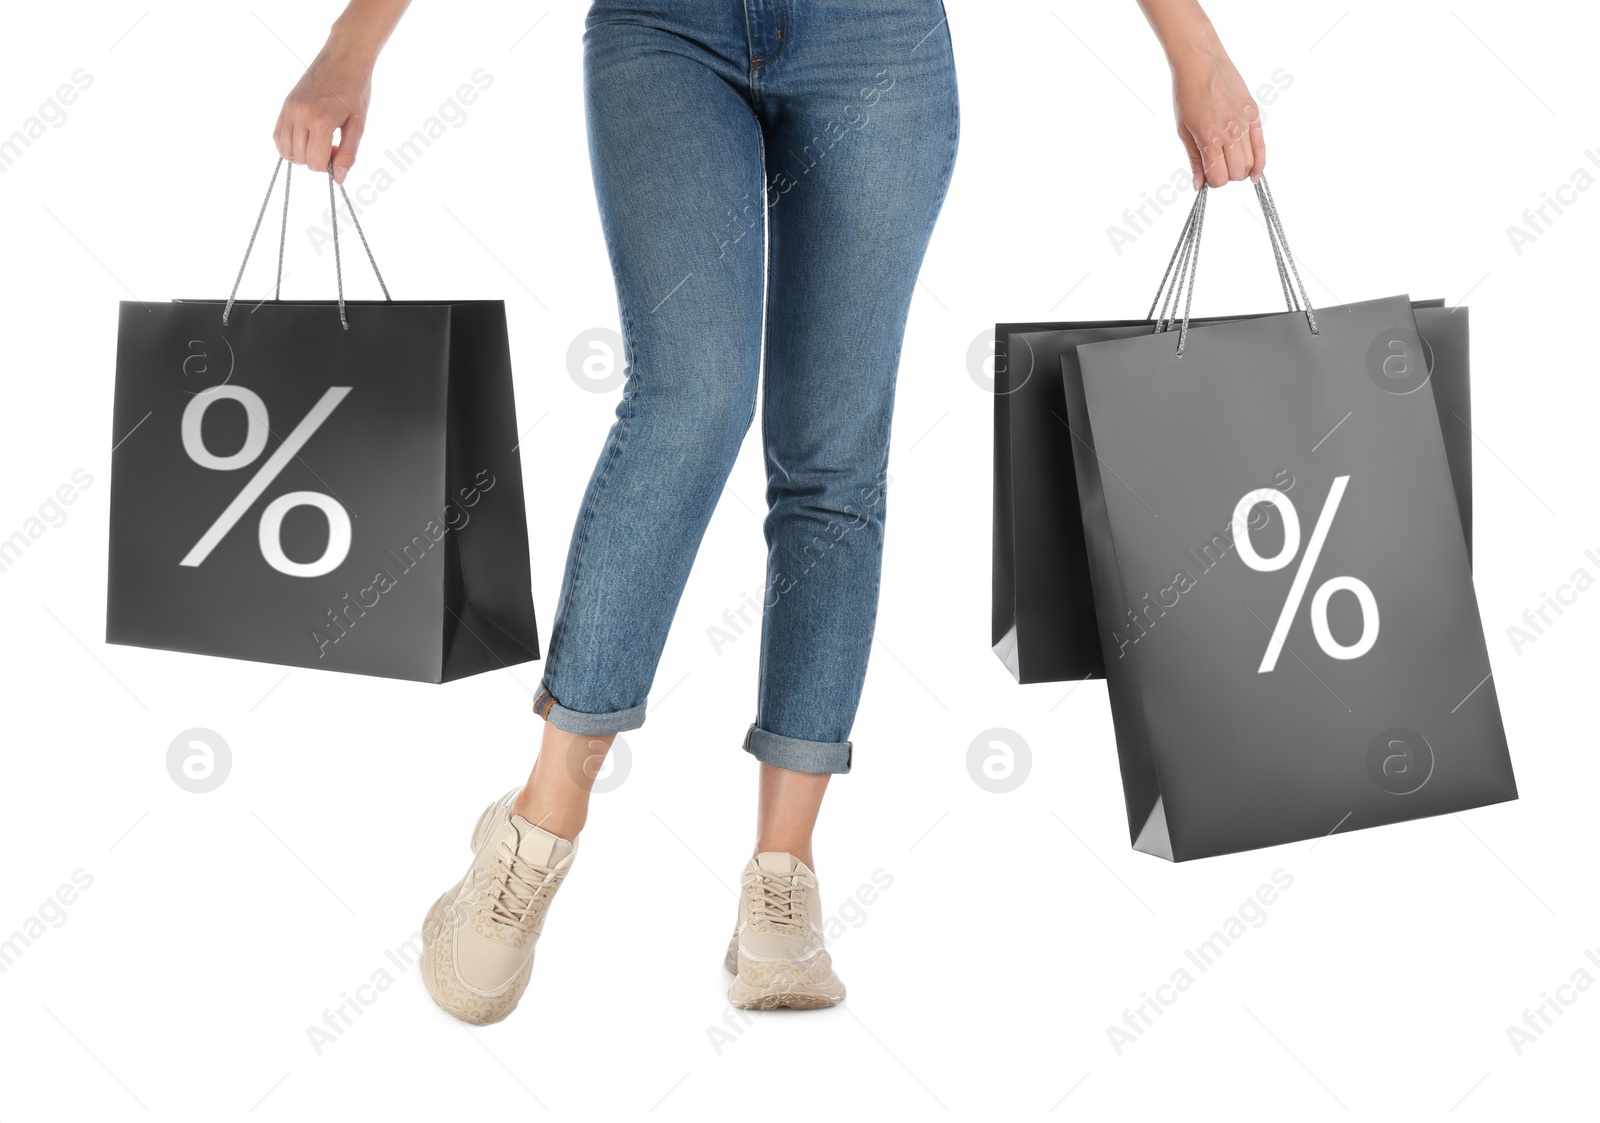 Image of Discount, sale, offer. Woman holding paper bags with percent signs against white background, closeup